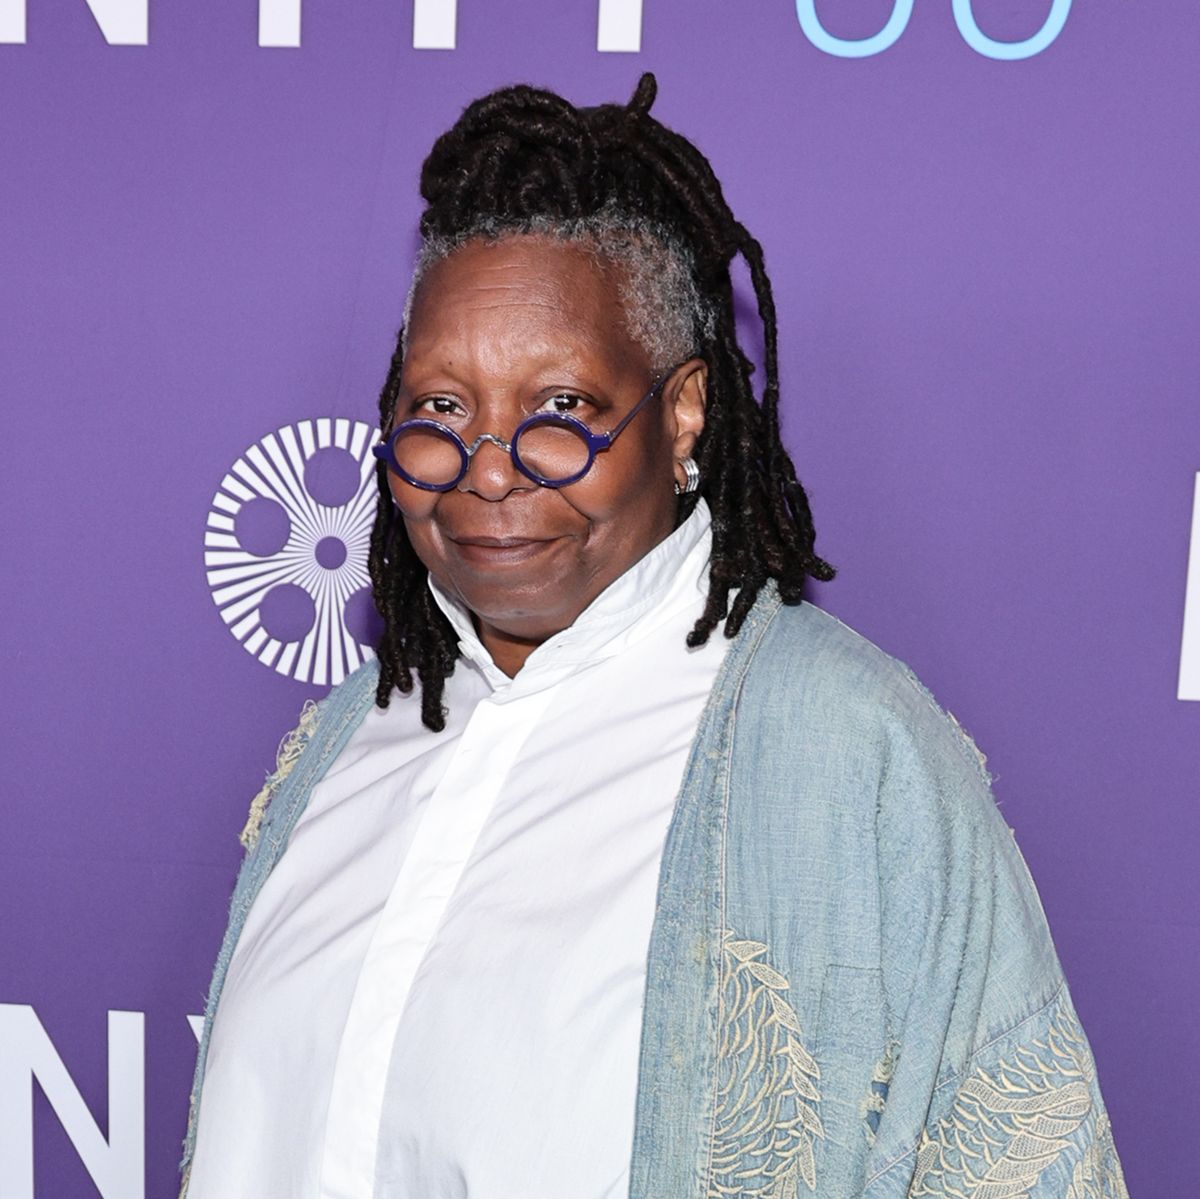 Whoopi Goldberg, 66, Gets Real About Aging in New Book